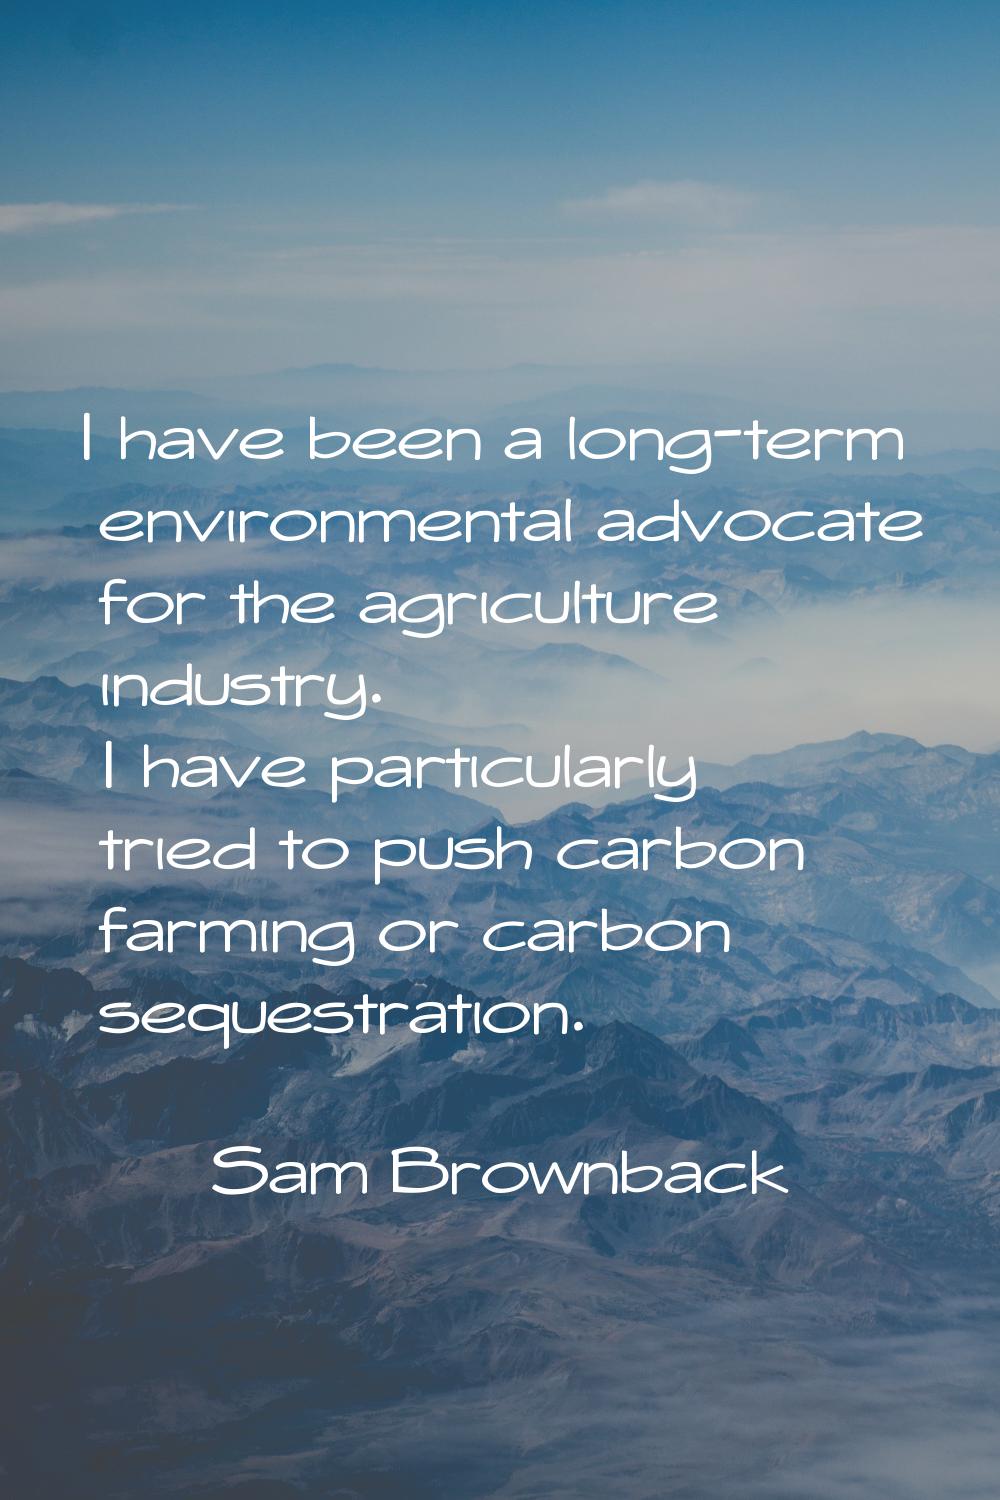 I have been a long-term environmental advocate for the agriculture industry. I have particularly tr